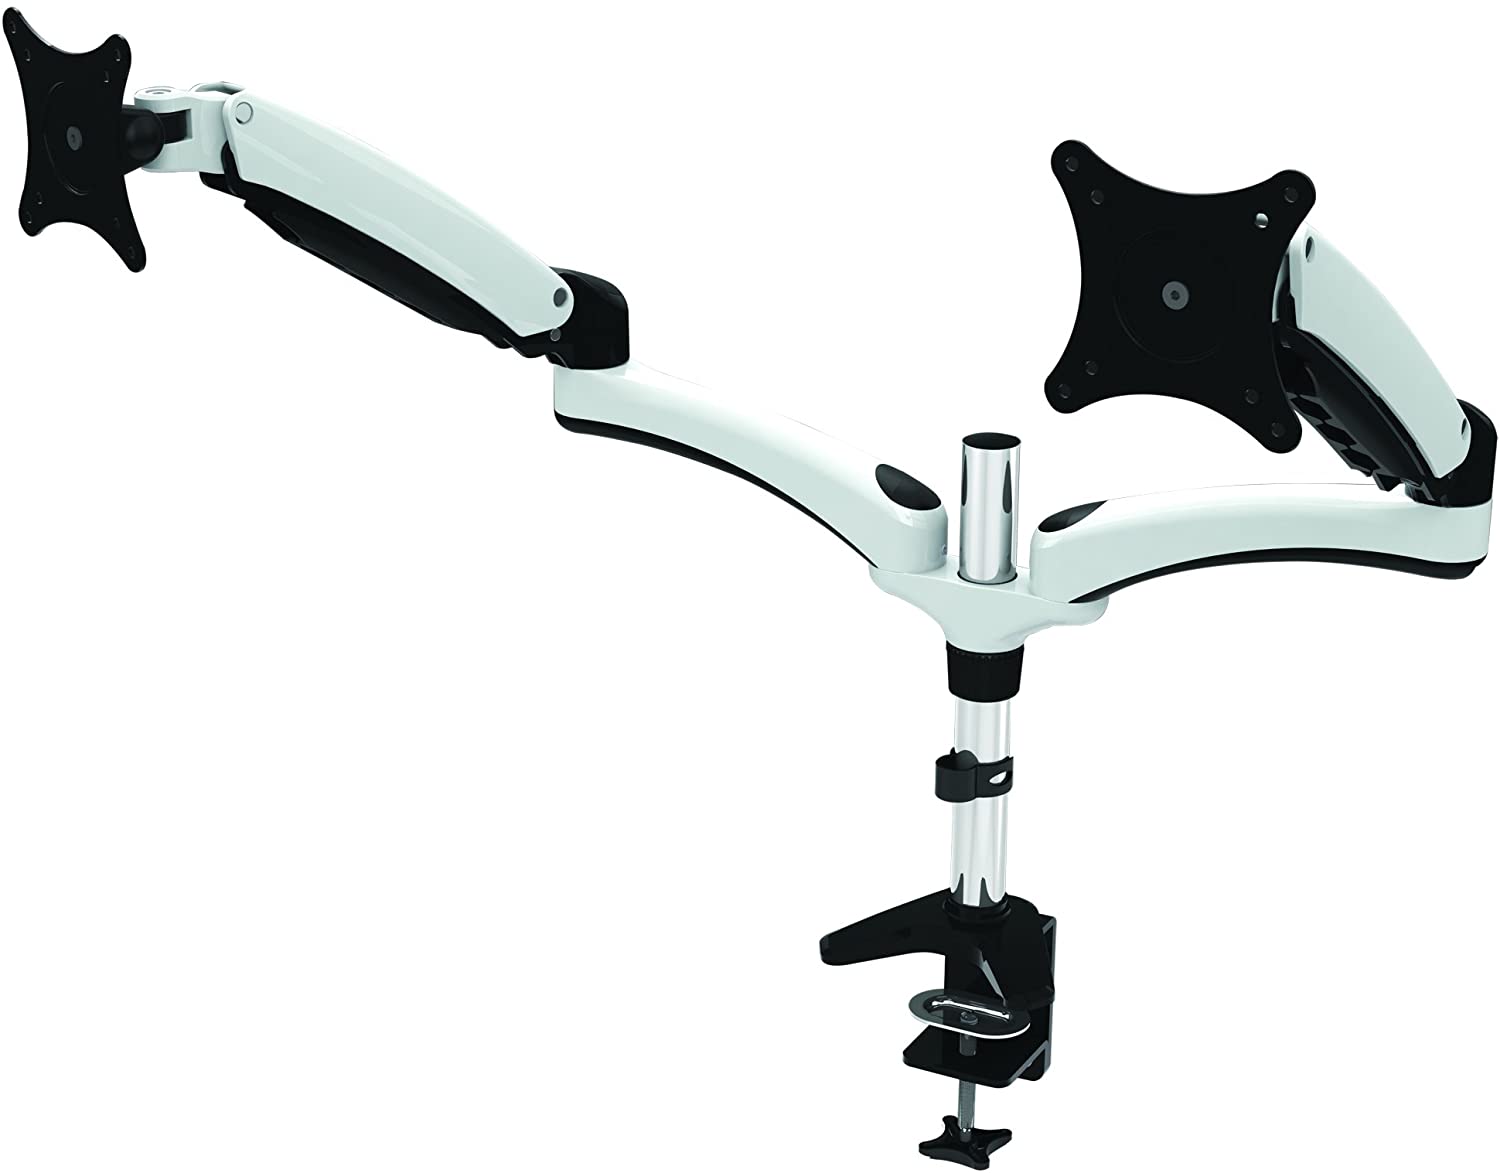 Amer Ergonomic Monitor Mount Articulating Arm (15-24, 27, 28 inch displays) 2 Monitor, Imperial White - HYDRA2